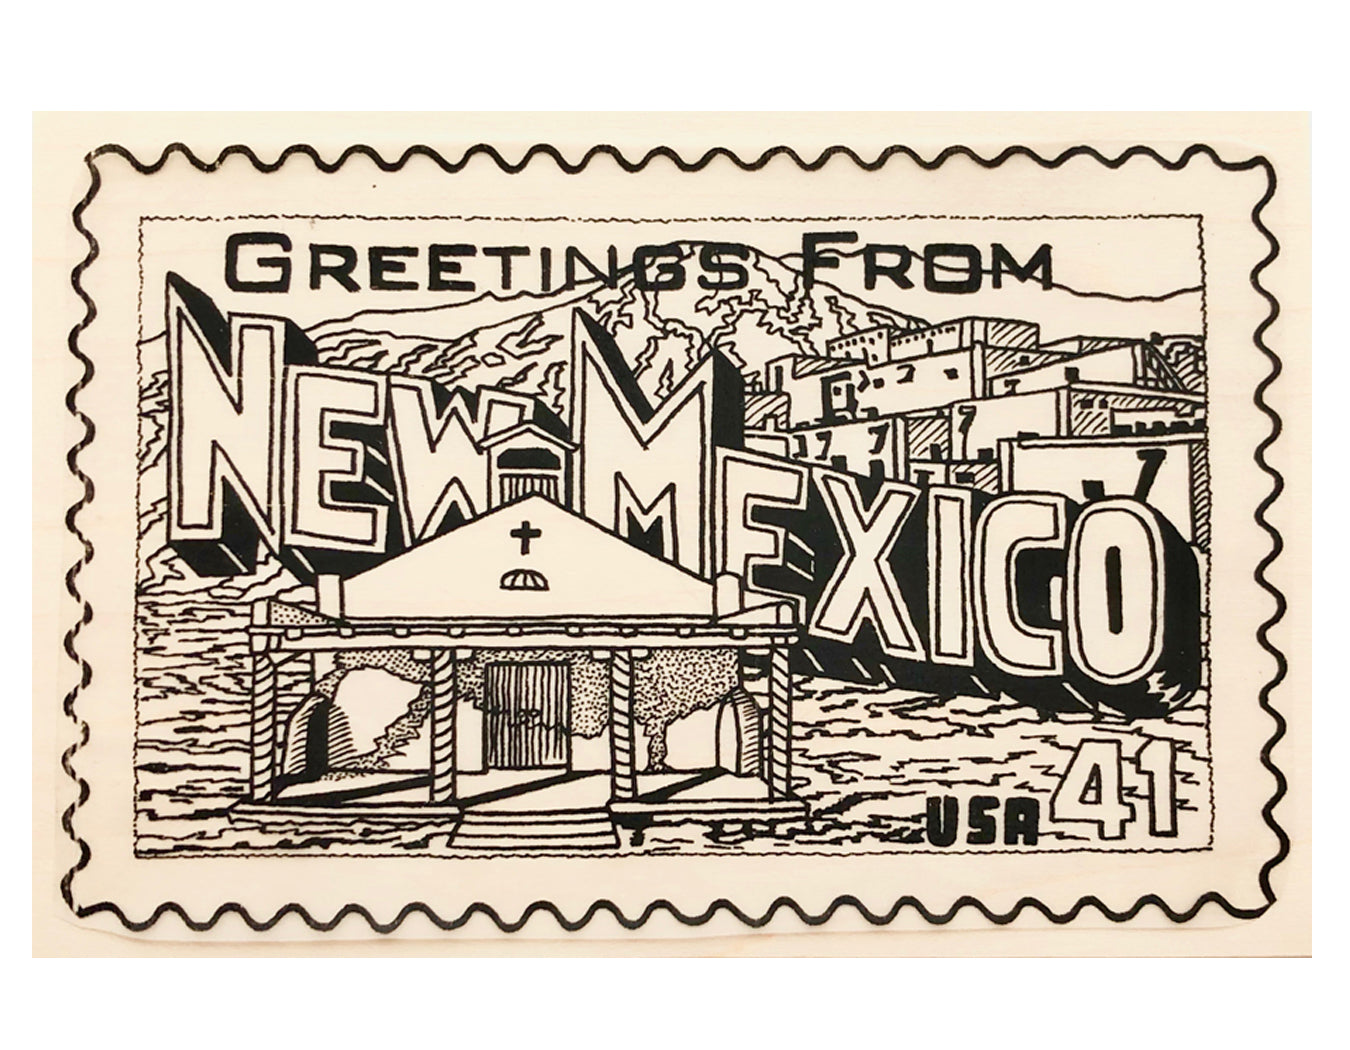 greetings from new mexico rubber stamp that mimics a postage stamp design